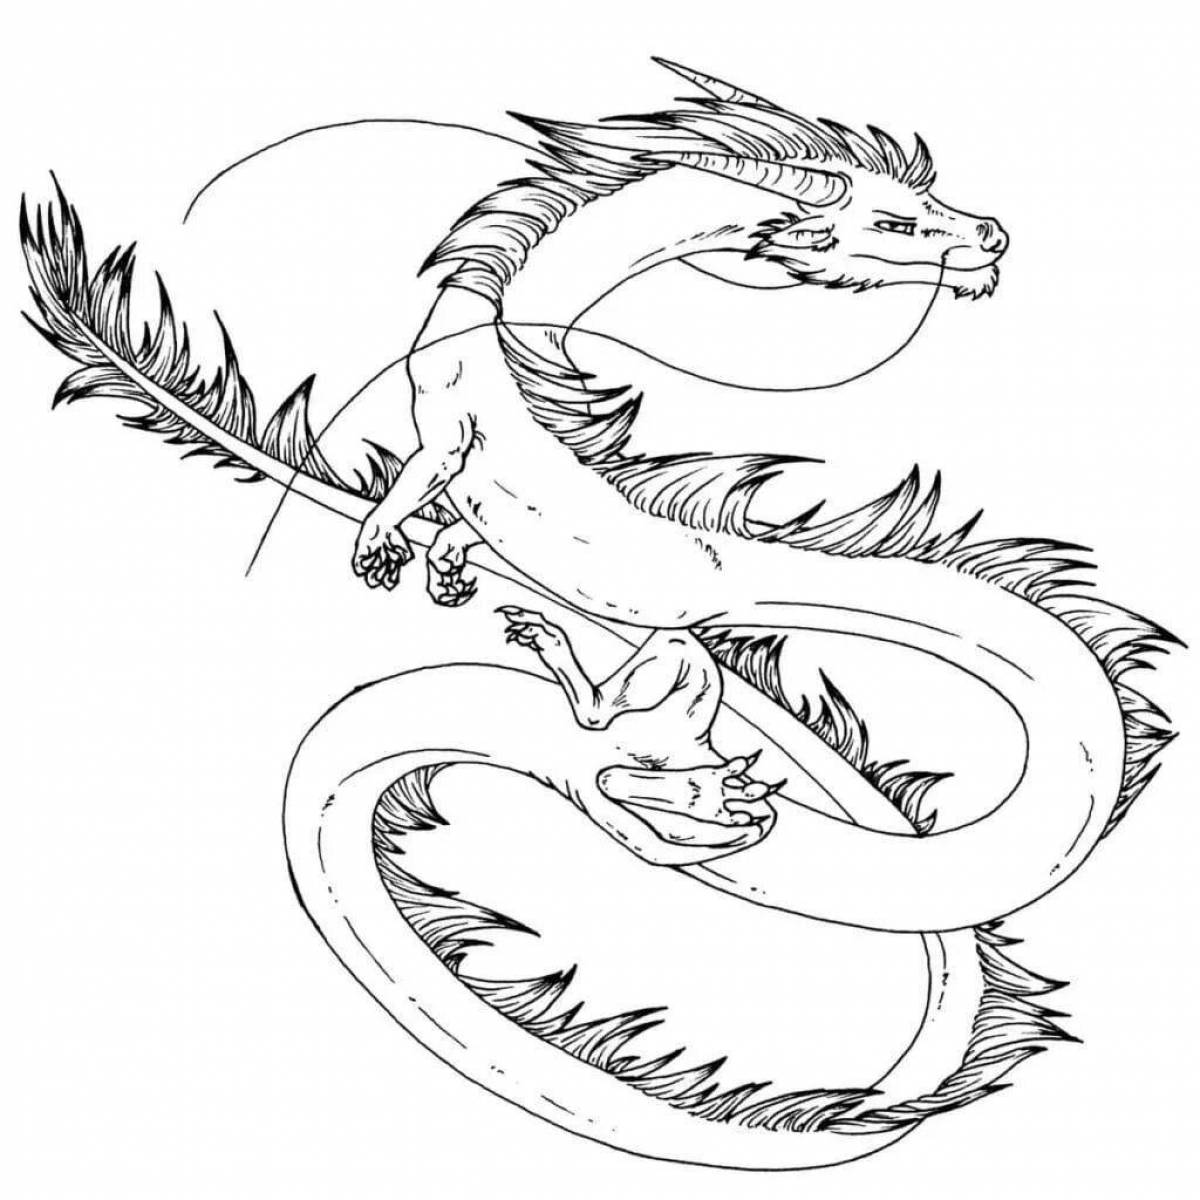 Japanese dragon art coloring page